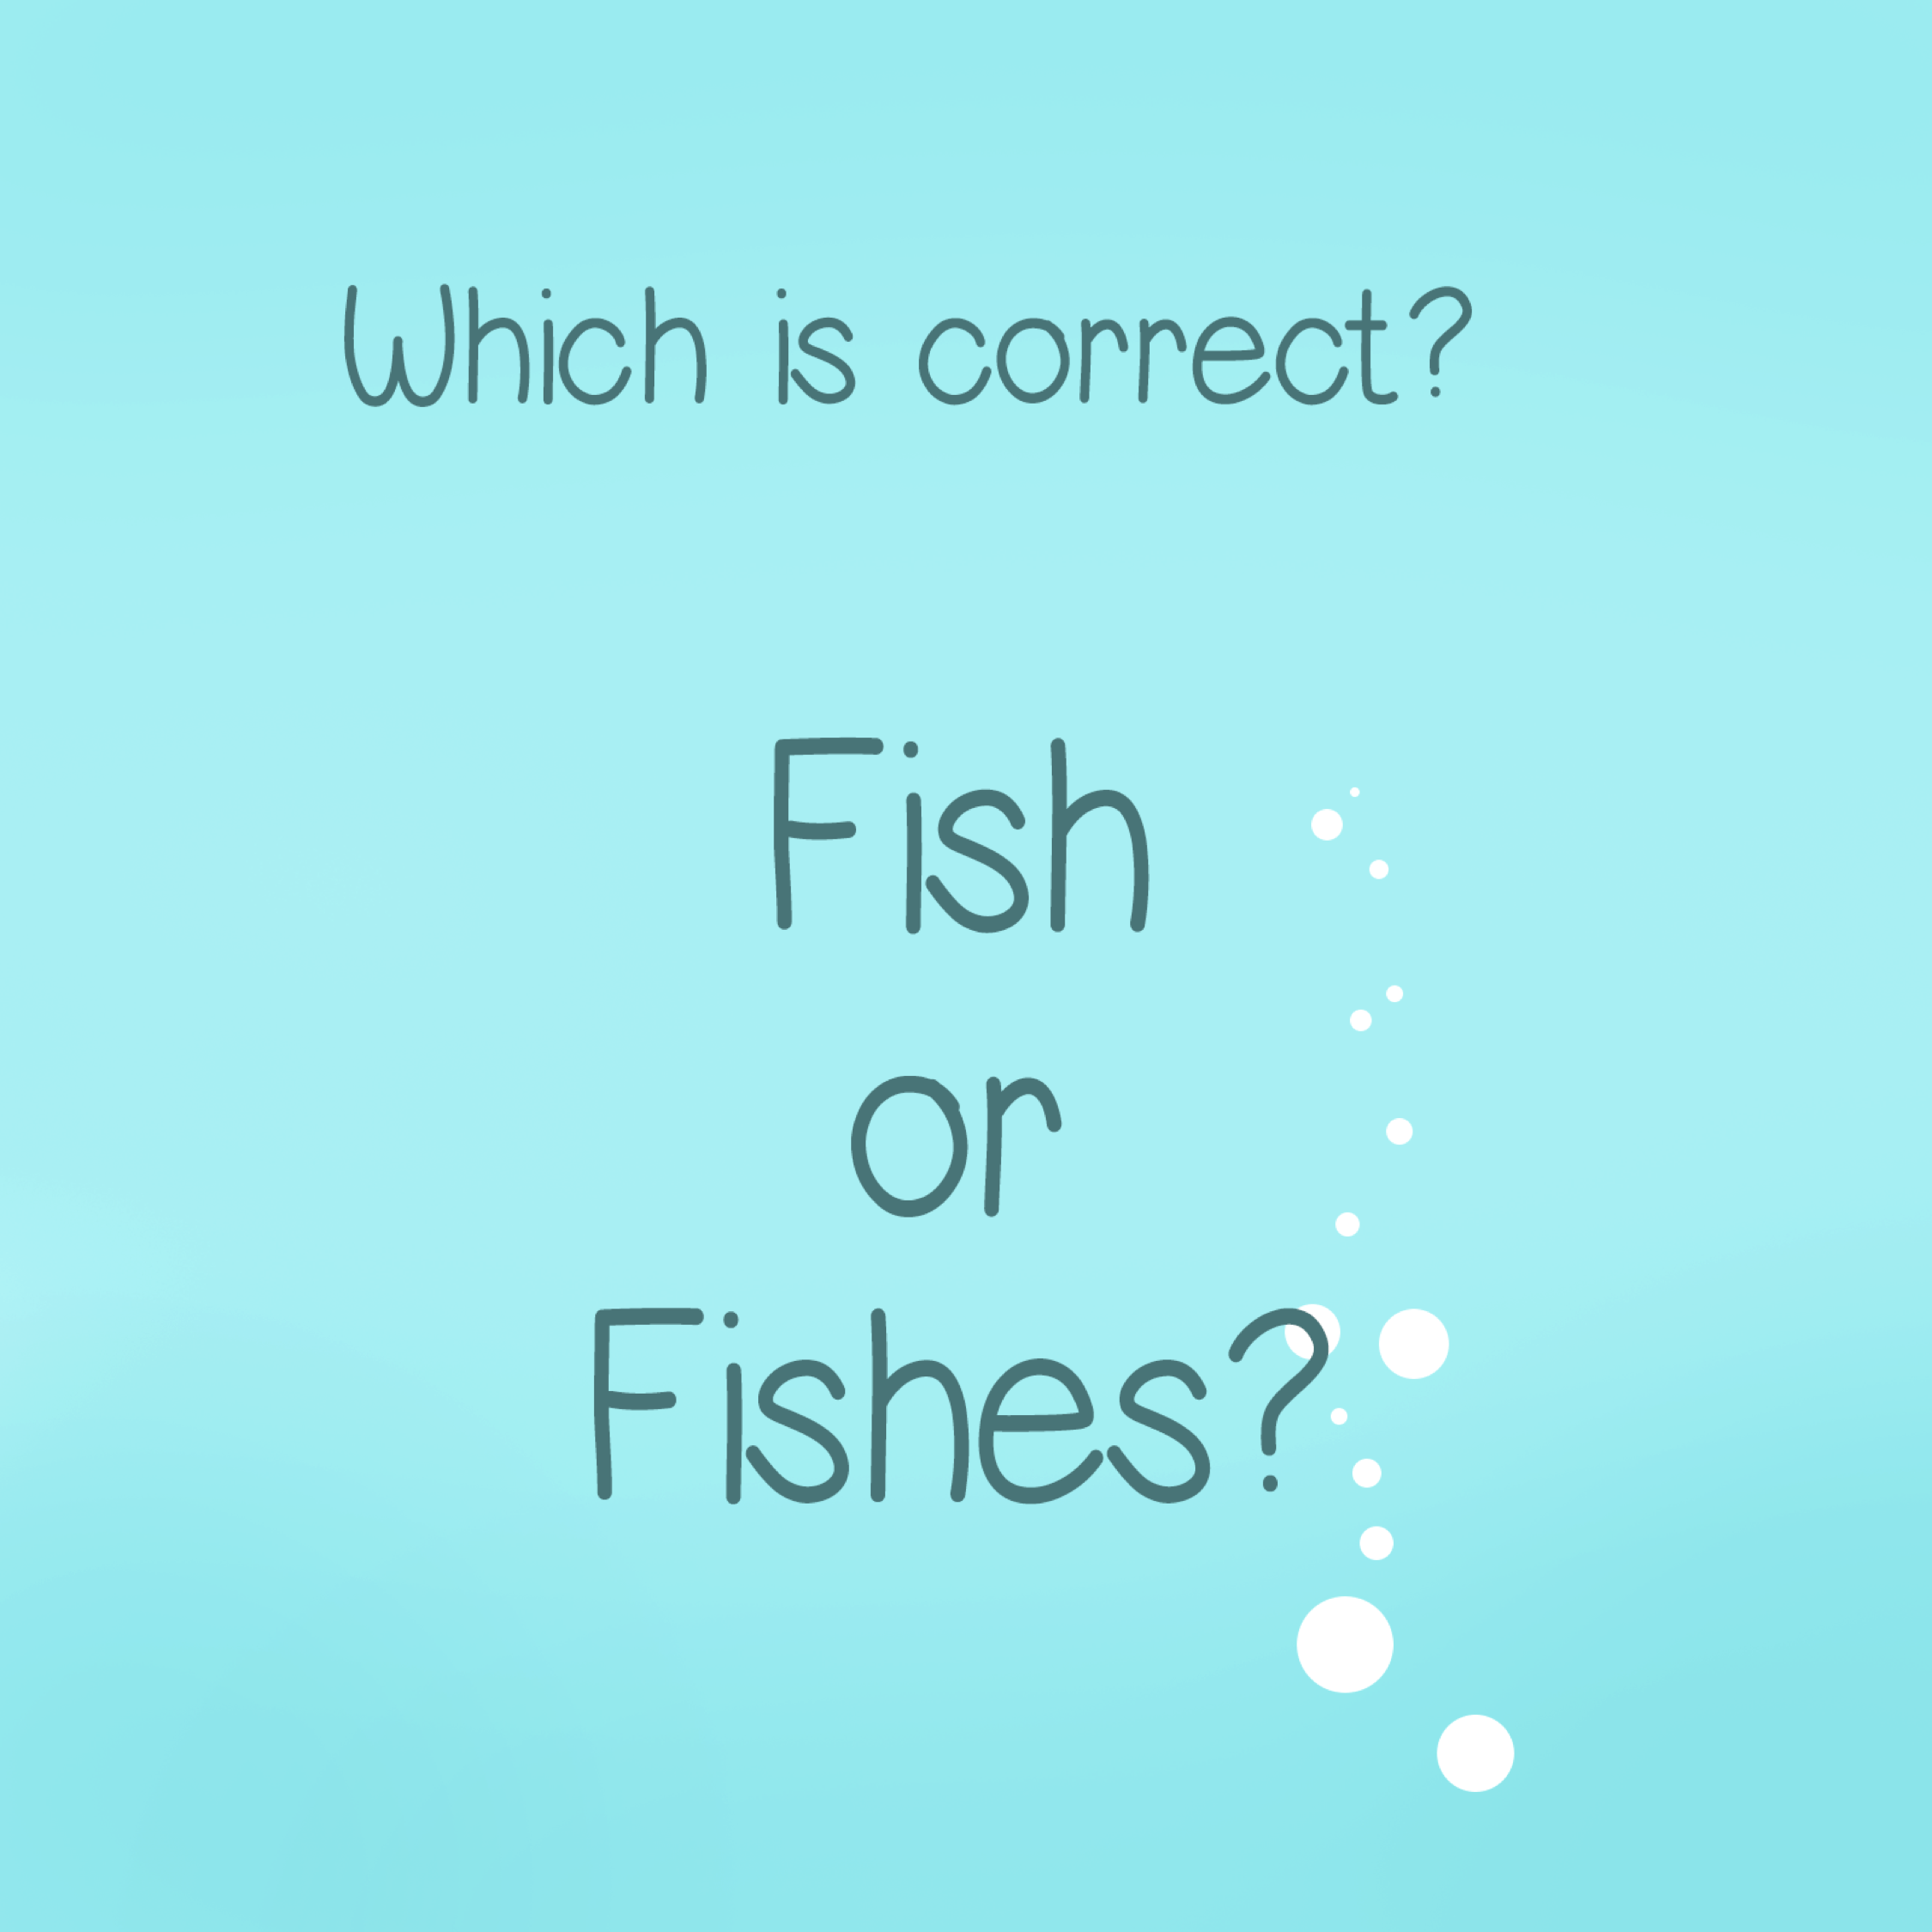 Which is correct? Fish or Fishes?